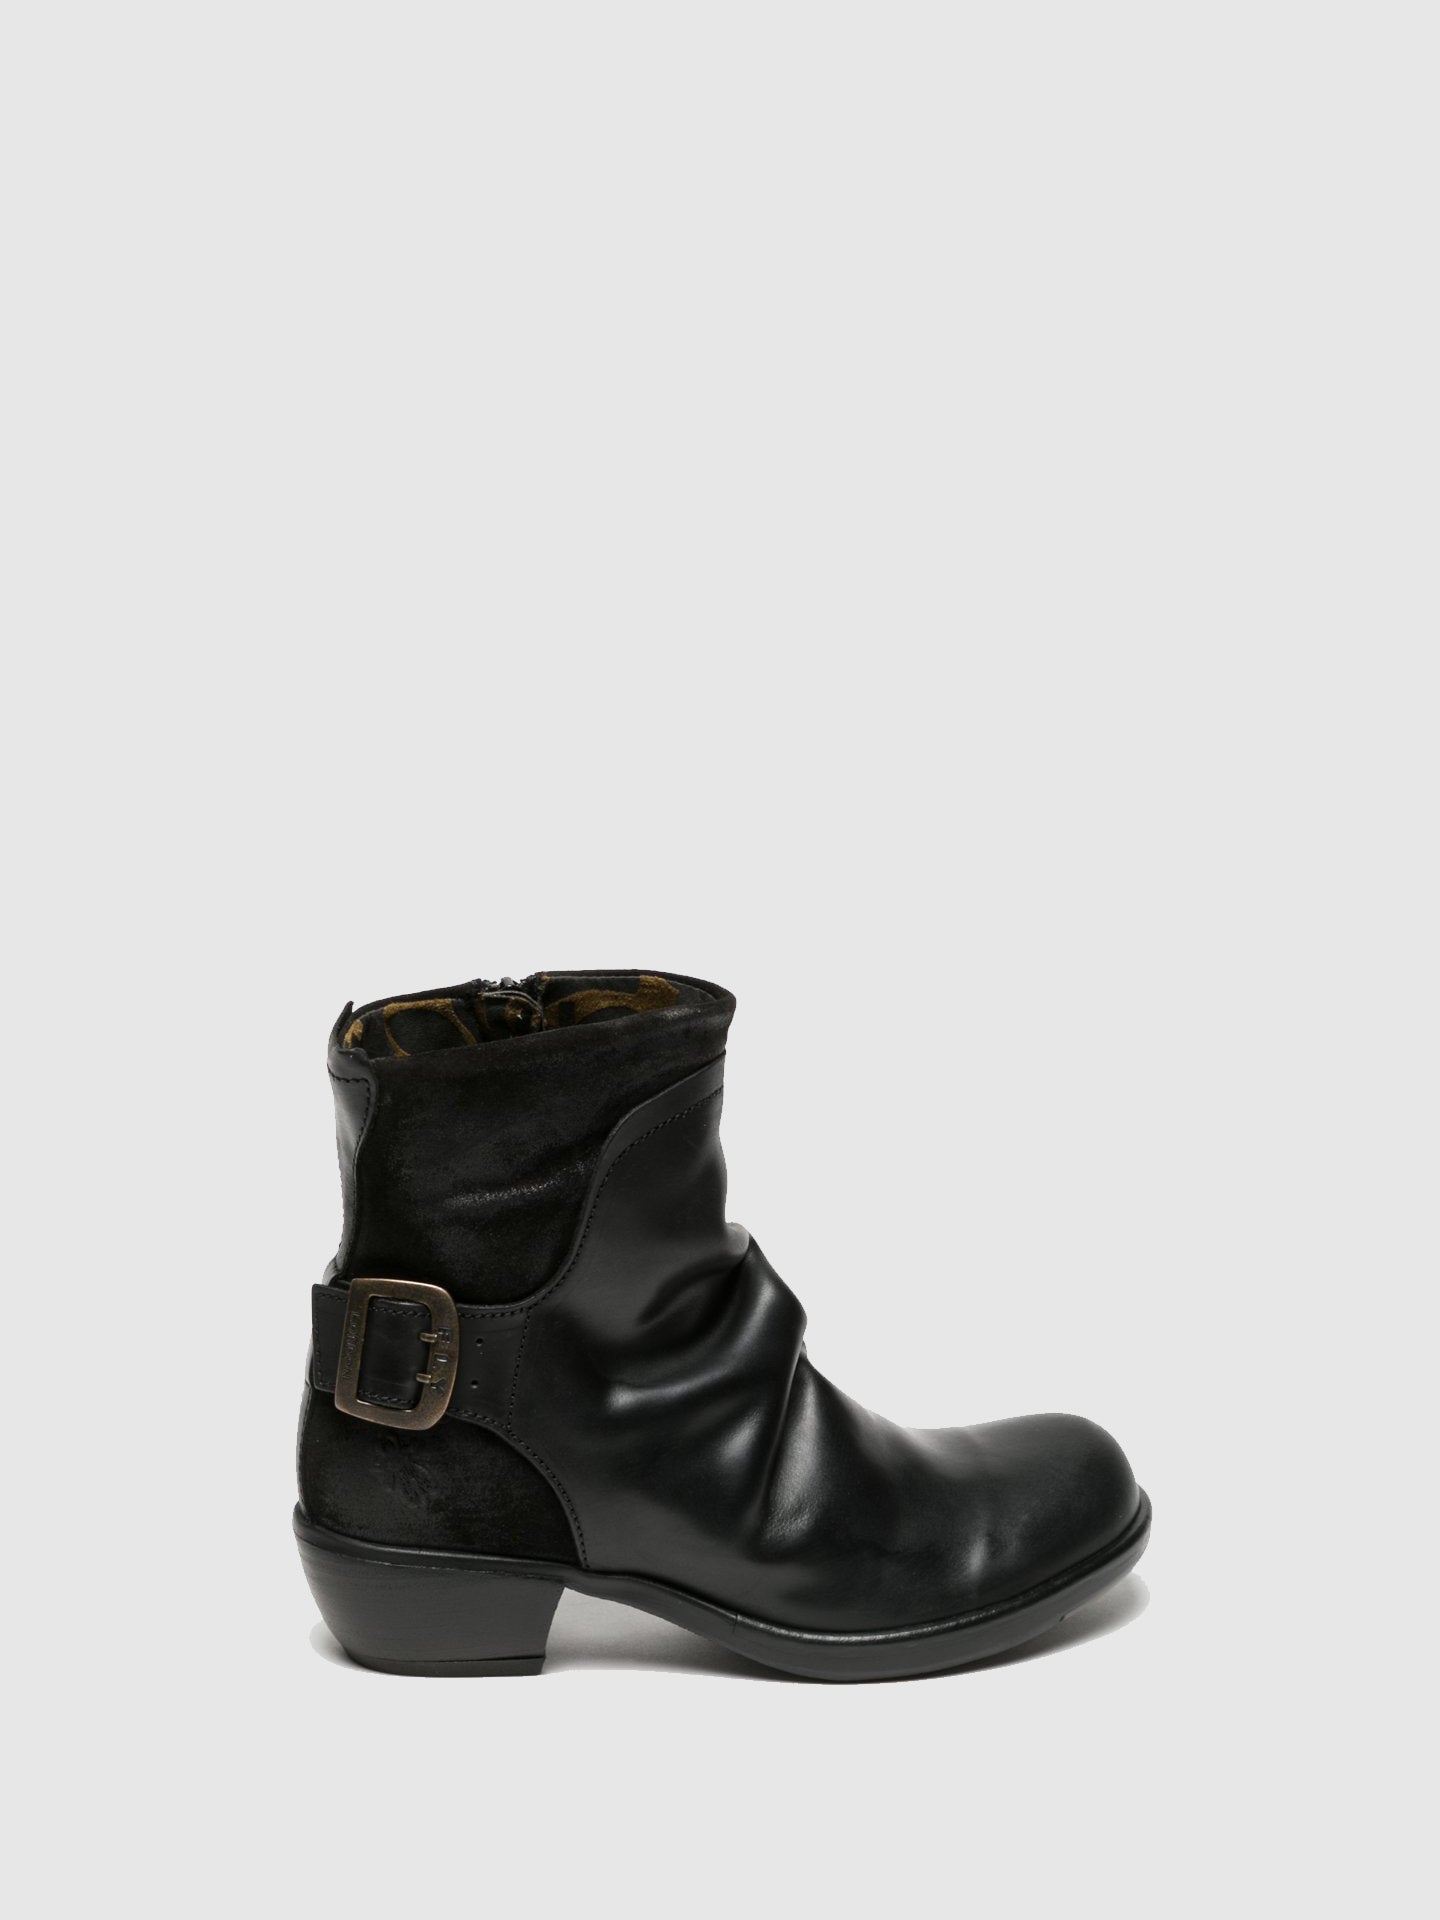 Fly London Black Buckle Ankle Boots